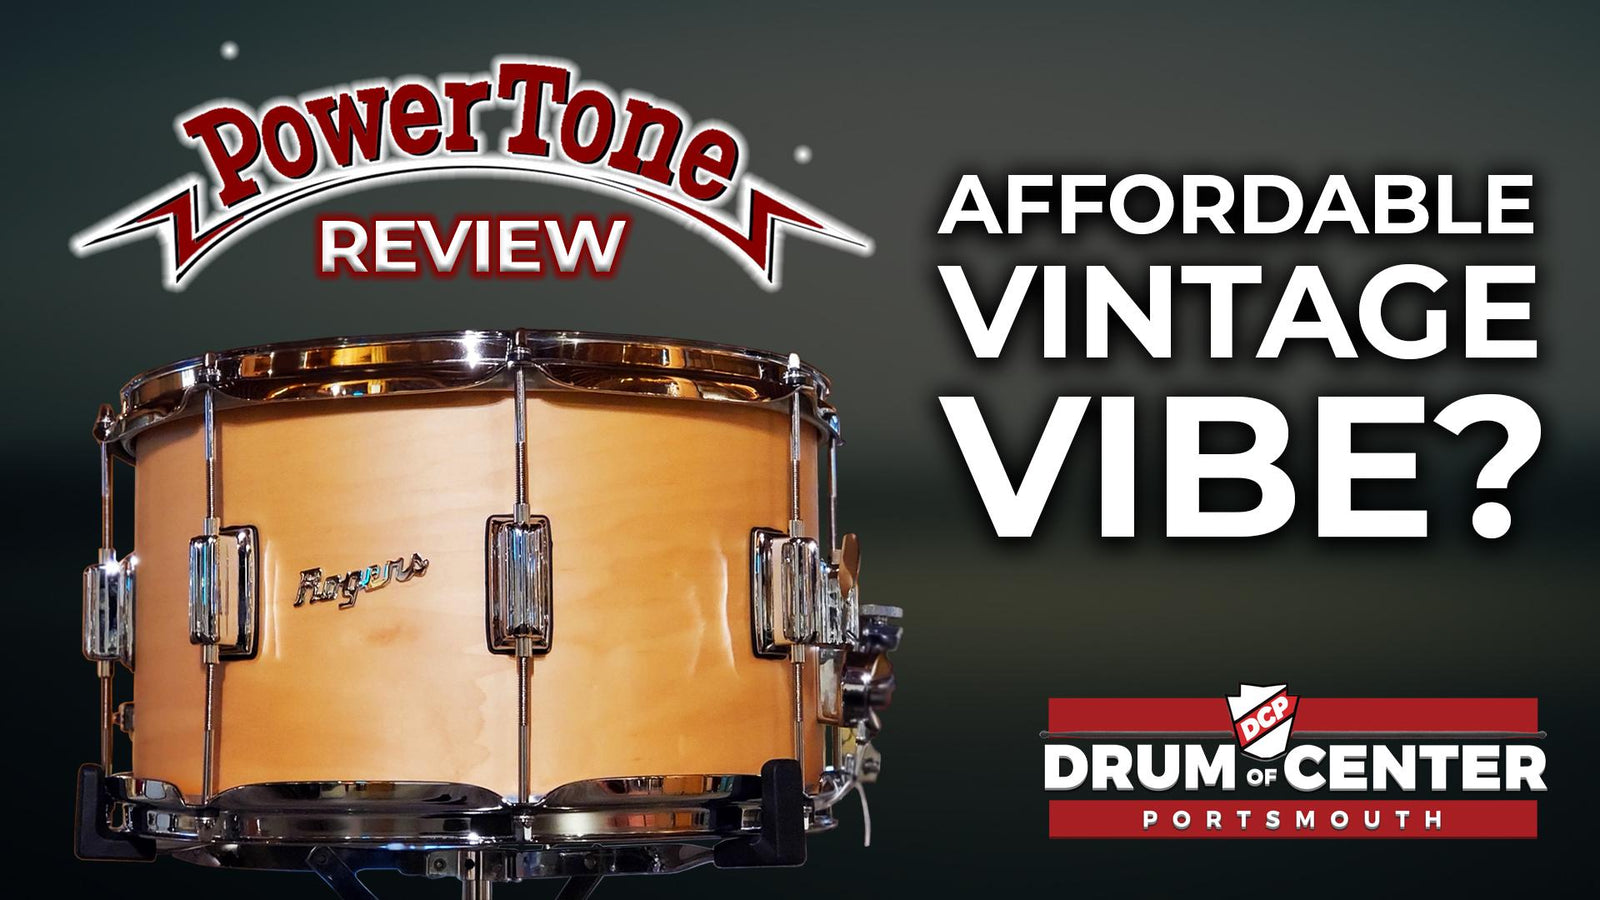 The New Rogers PowerTone Snare Drums Review